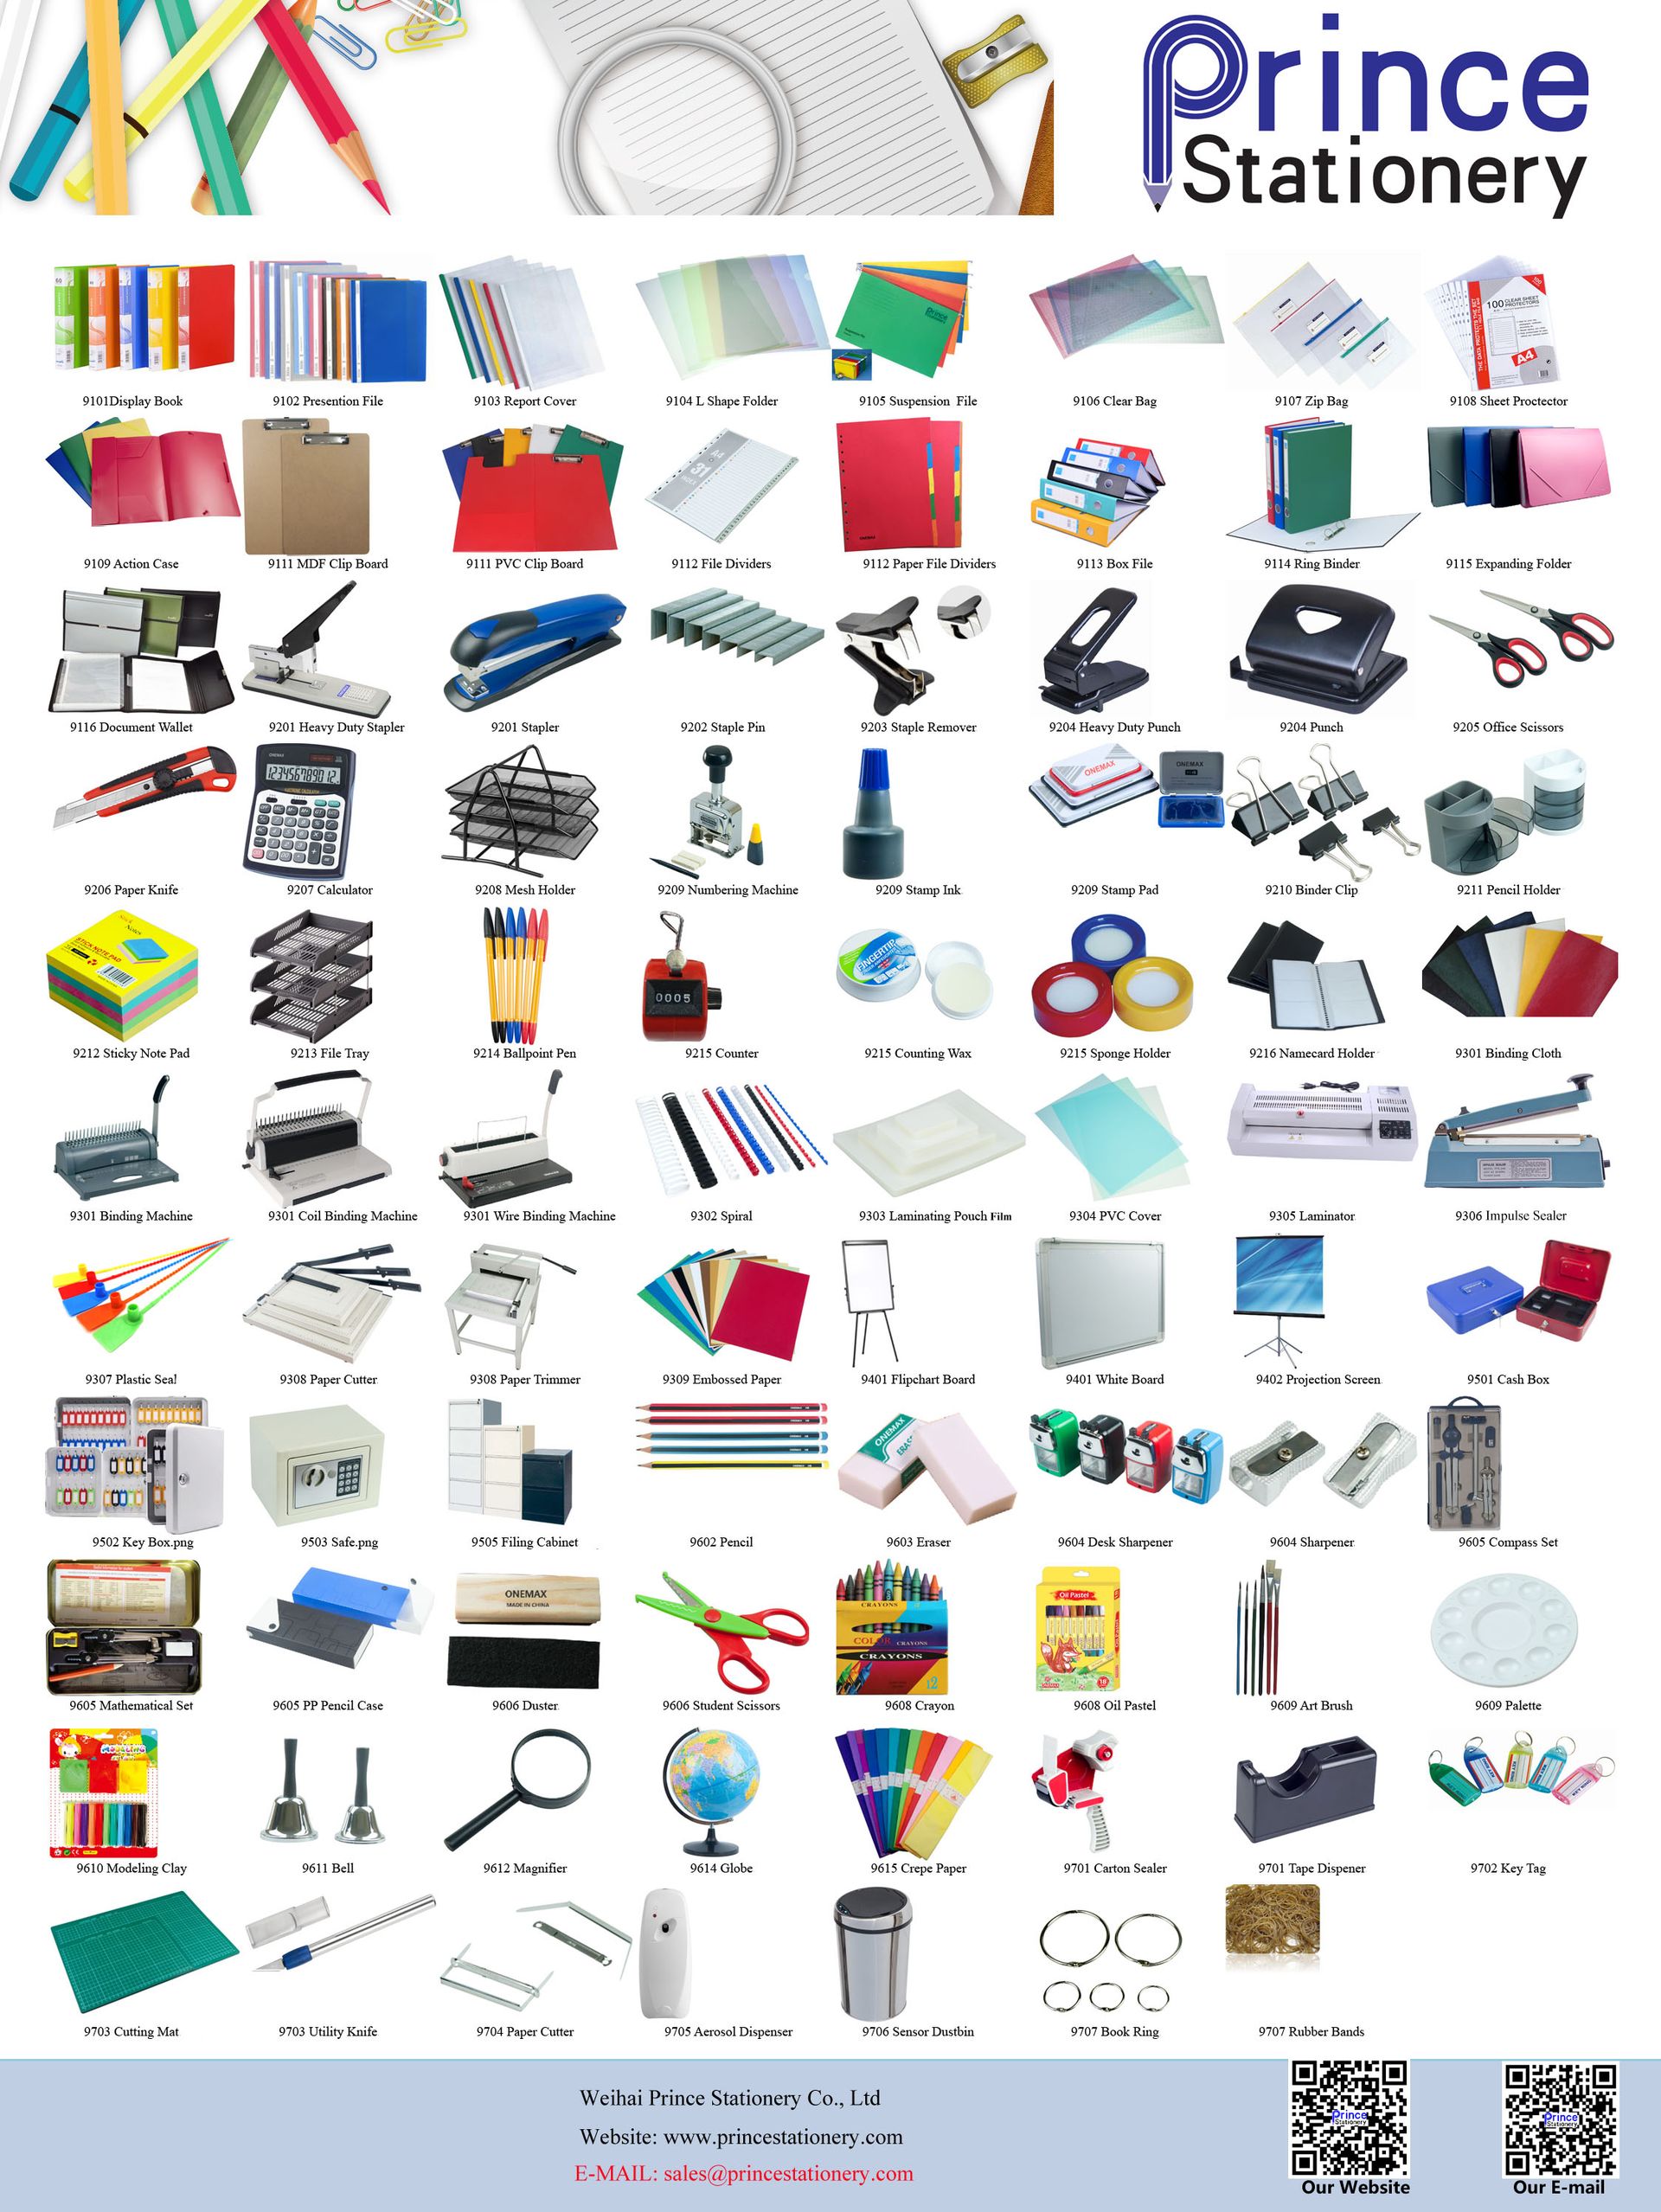 Weihai Prince Stationery Co., Ltd - Stationery Office Supplies